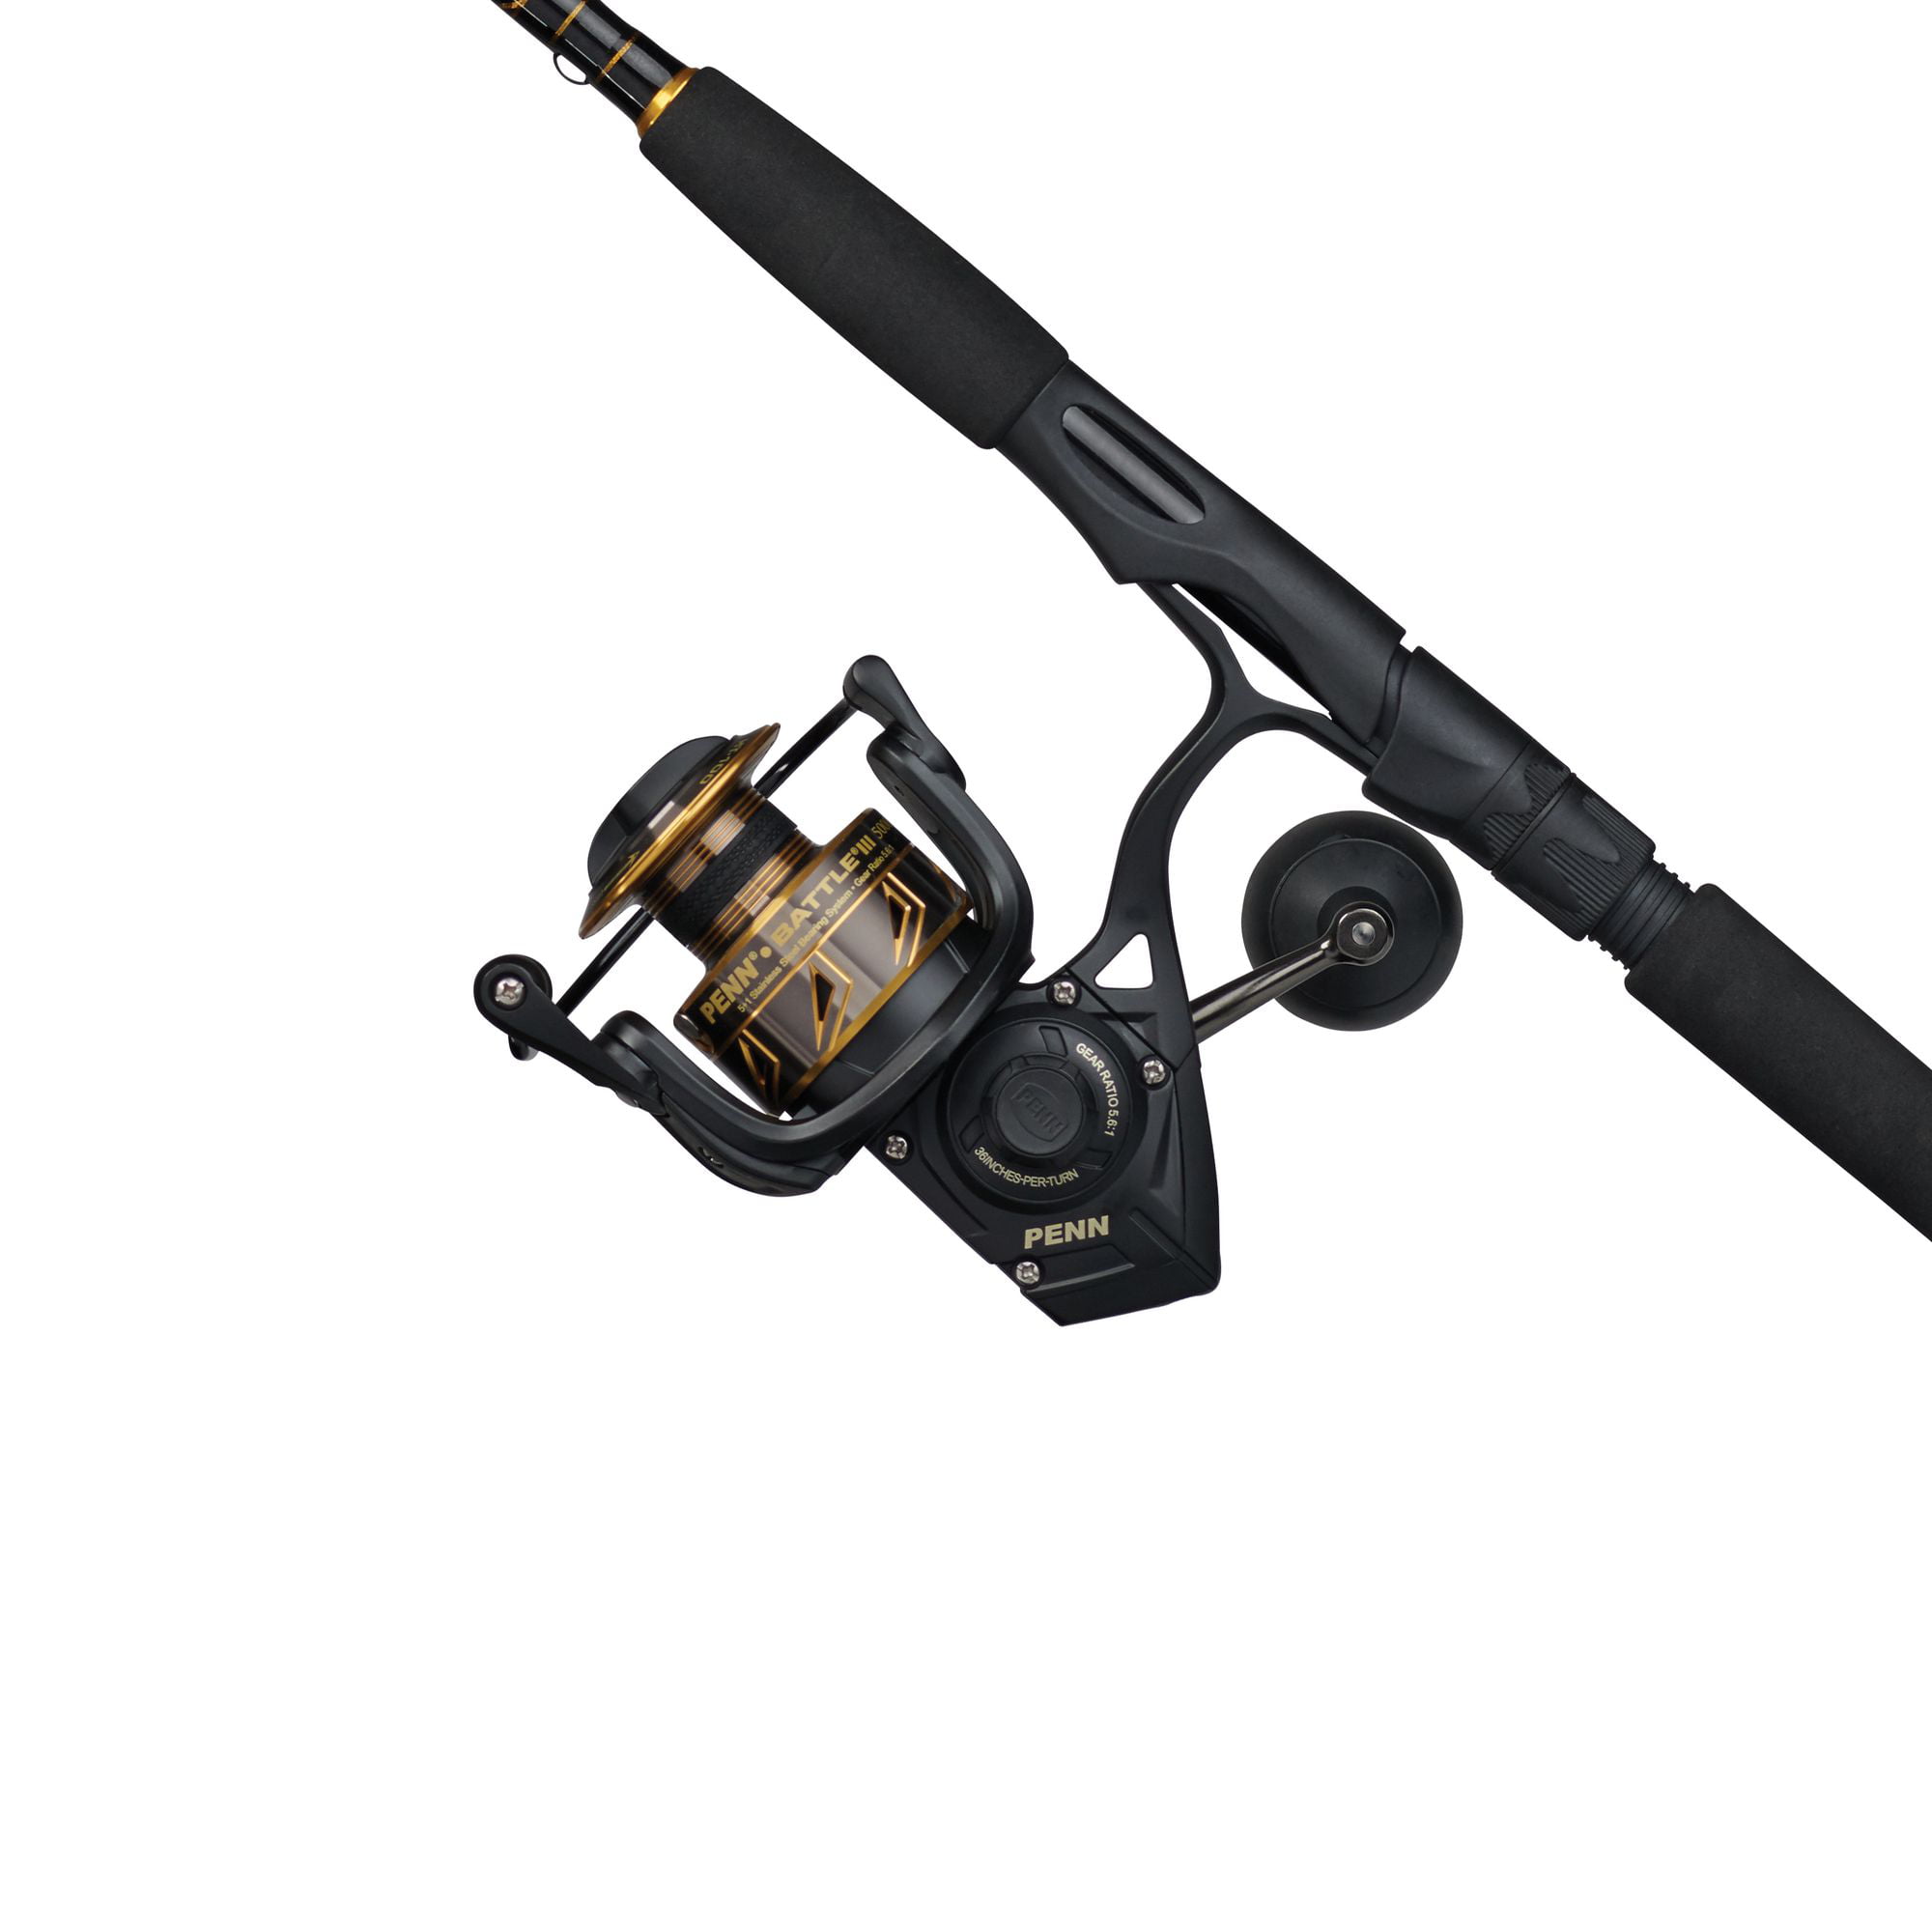 PENN Battle Spinning Reel and Fishing Rod Combo Kit with Spare Spool and  Reel Cover, Black, 4000 - 7' - Medium - 1pc - Yahoo Shopping